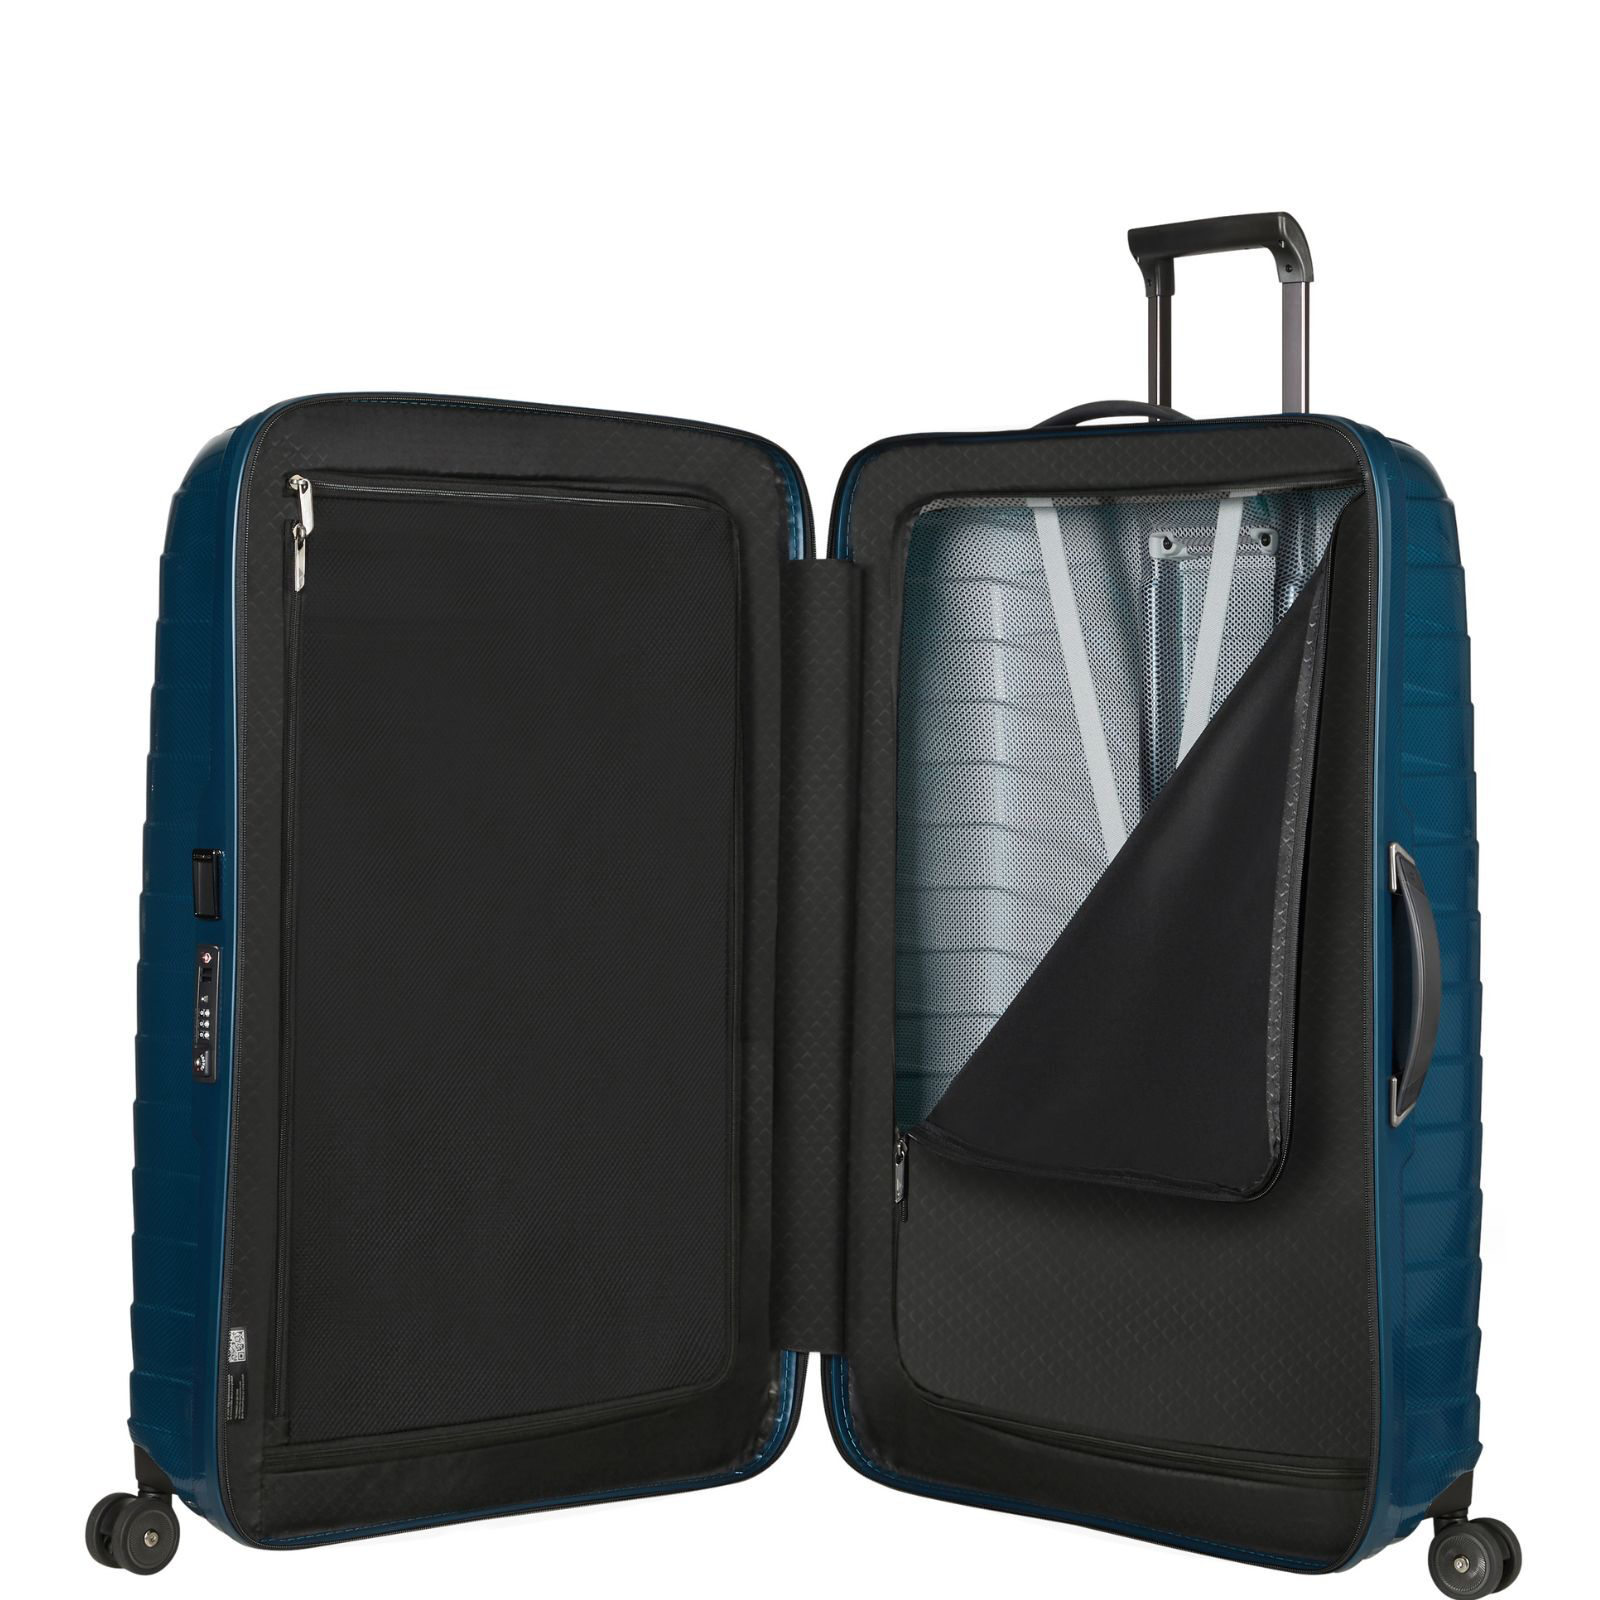 Samsonite Proxis 81 cm 4 Wheel Spinner Luggage - The Luggage Place